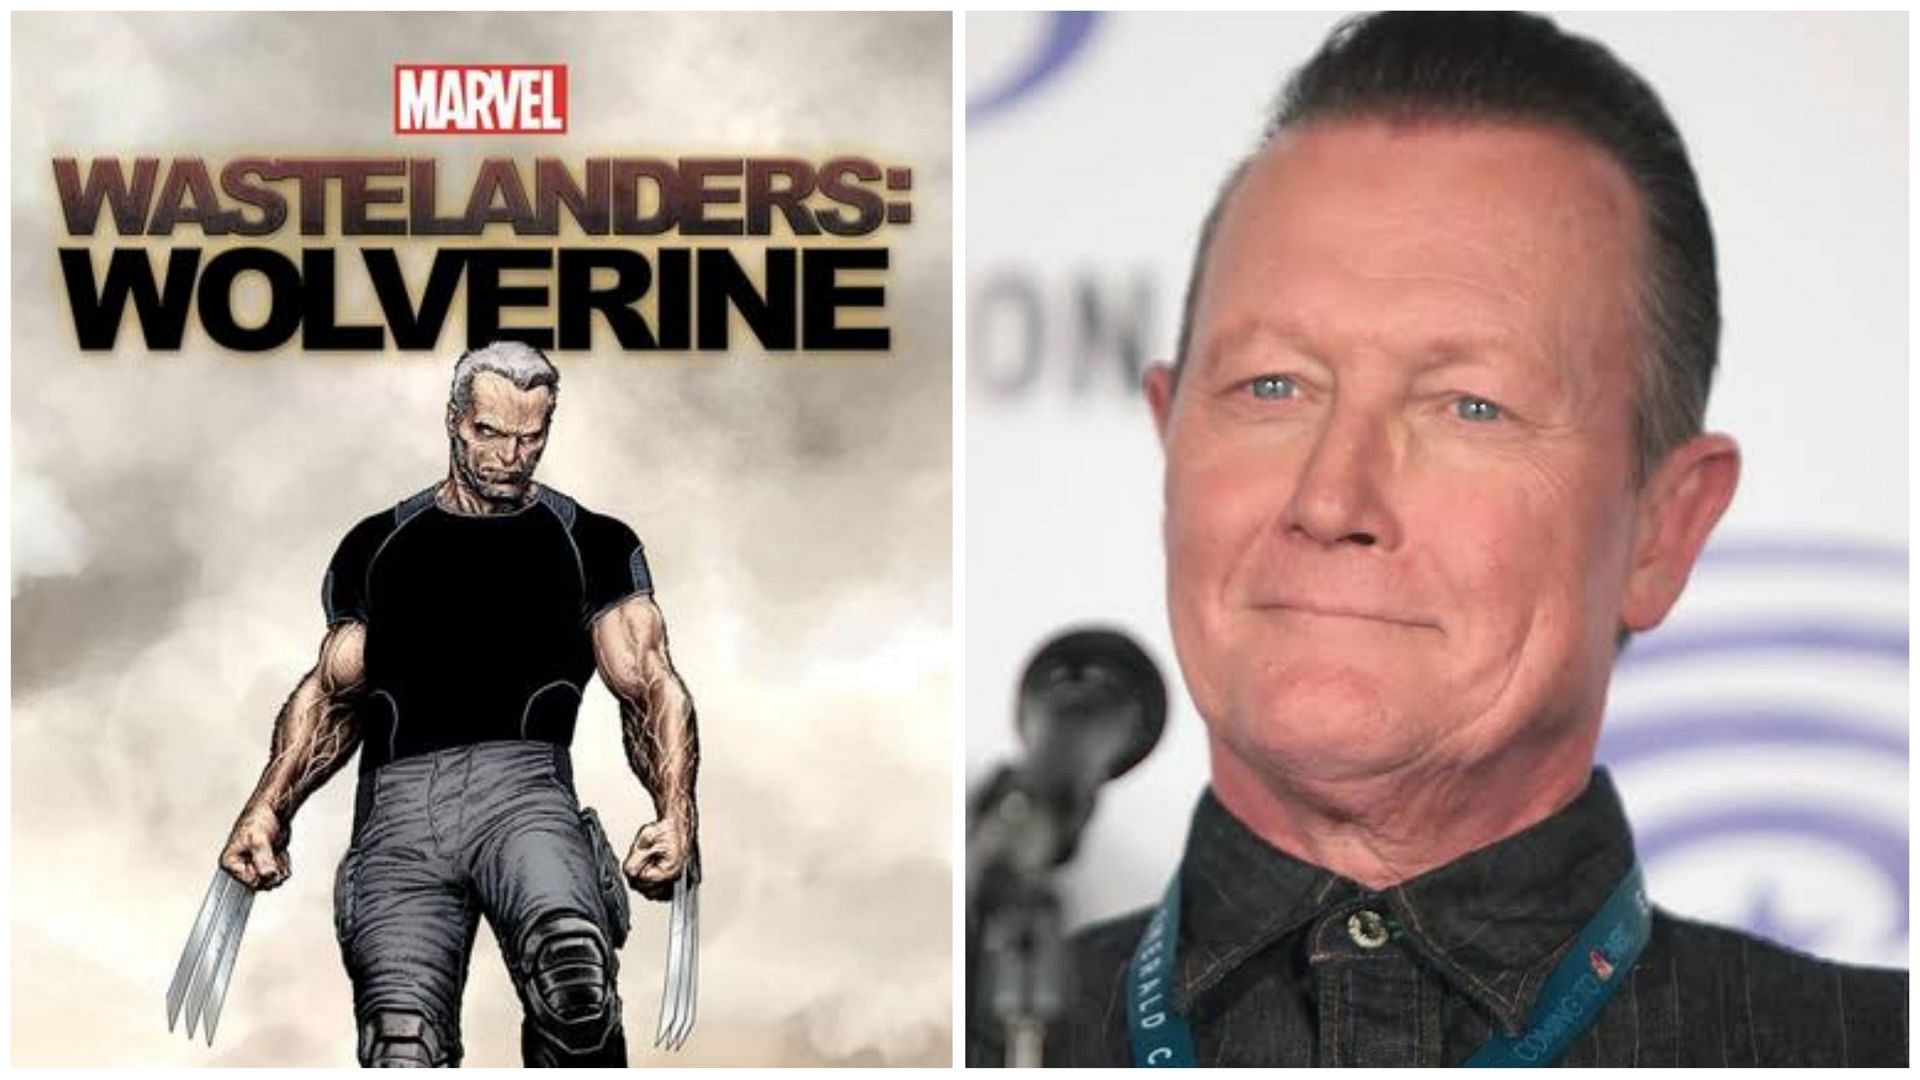 Robert Patrick and Marvel&#039;s Wastelander Cover (Images via Wikipedia and Marvel Comics)